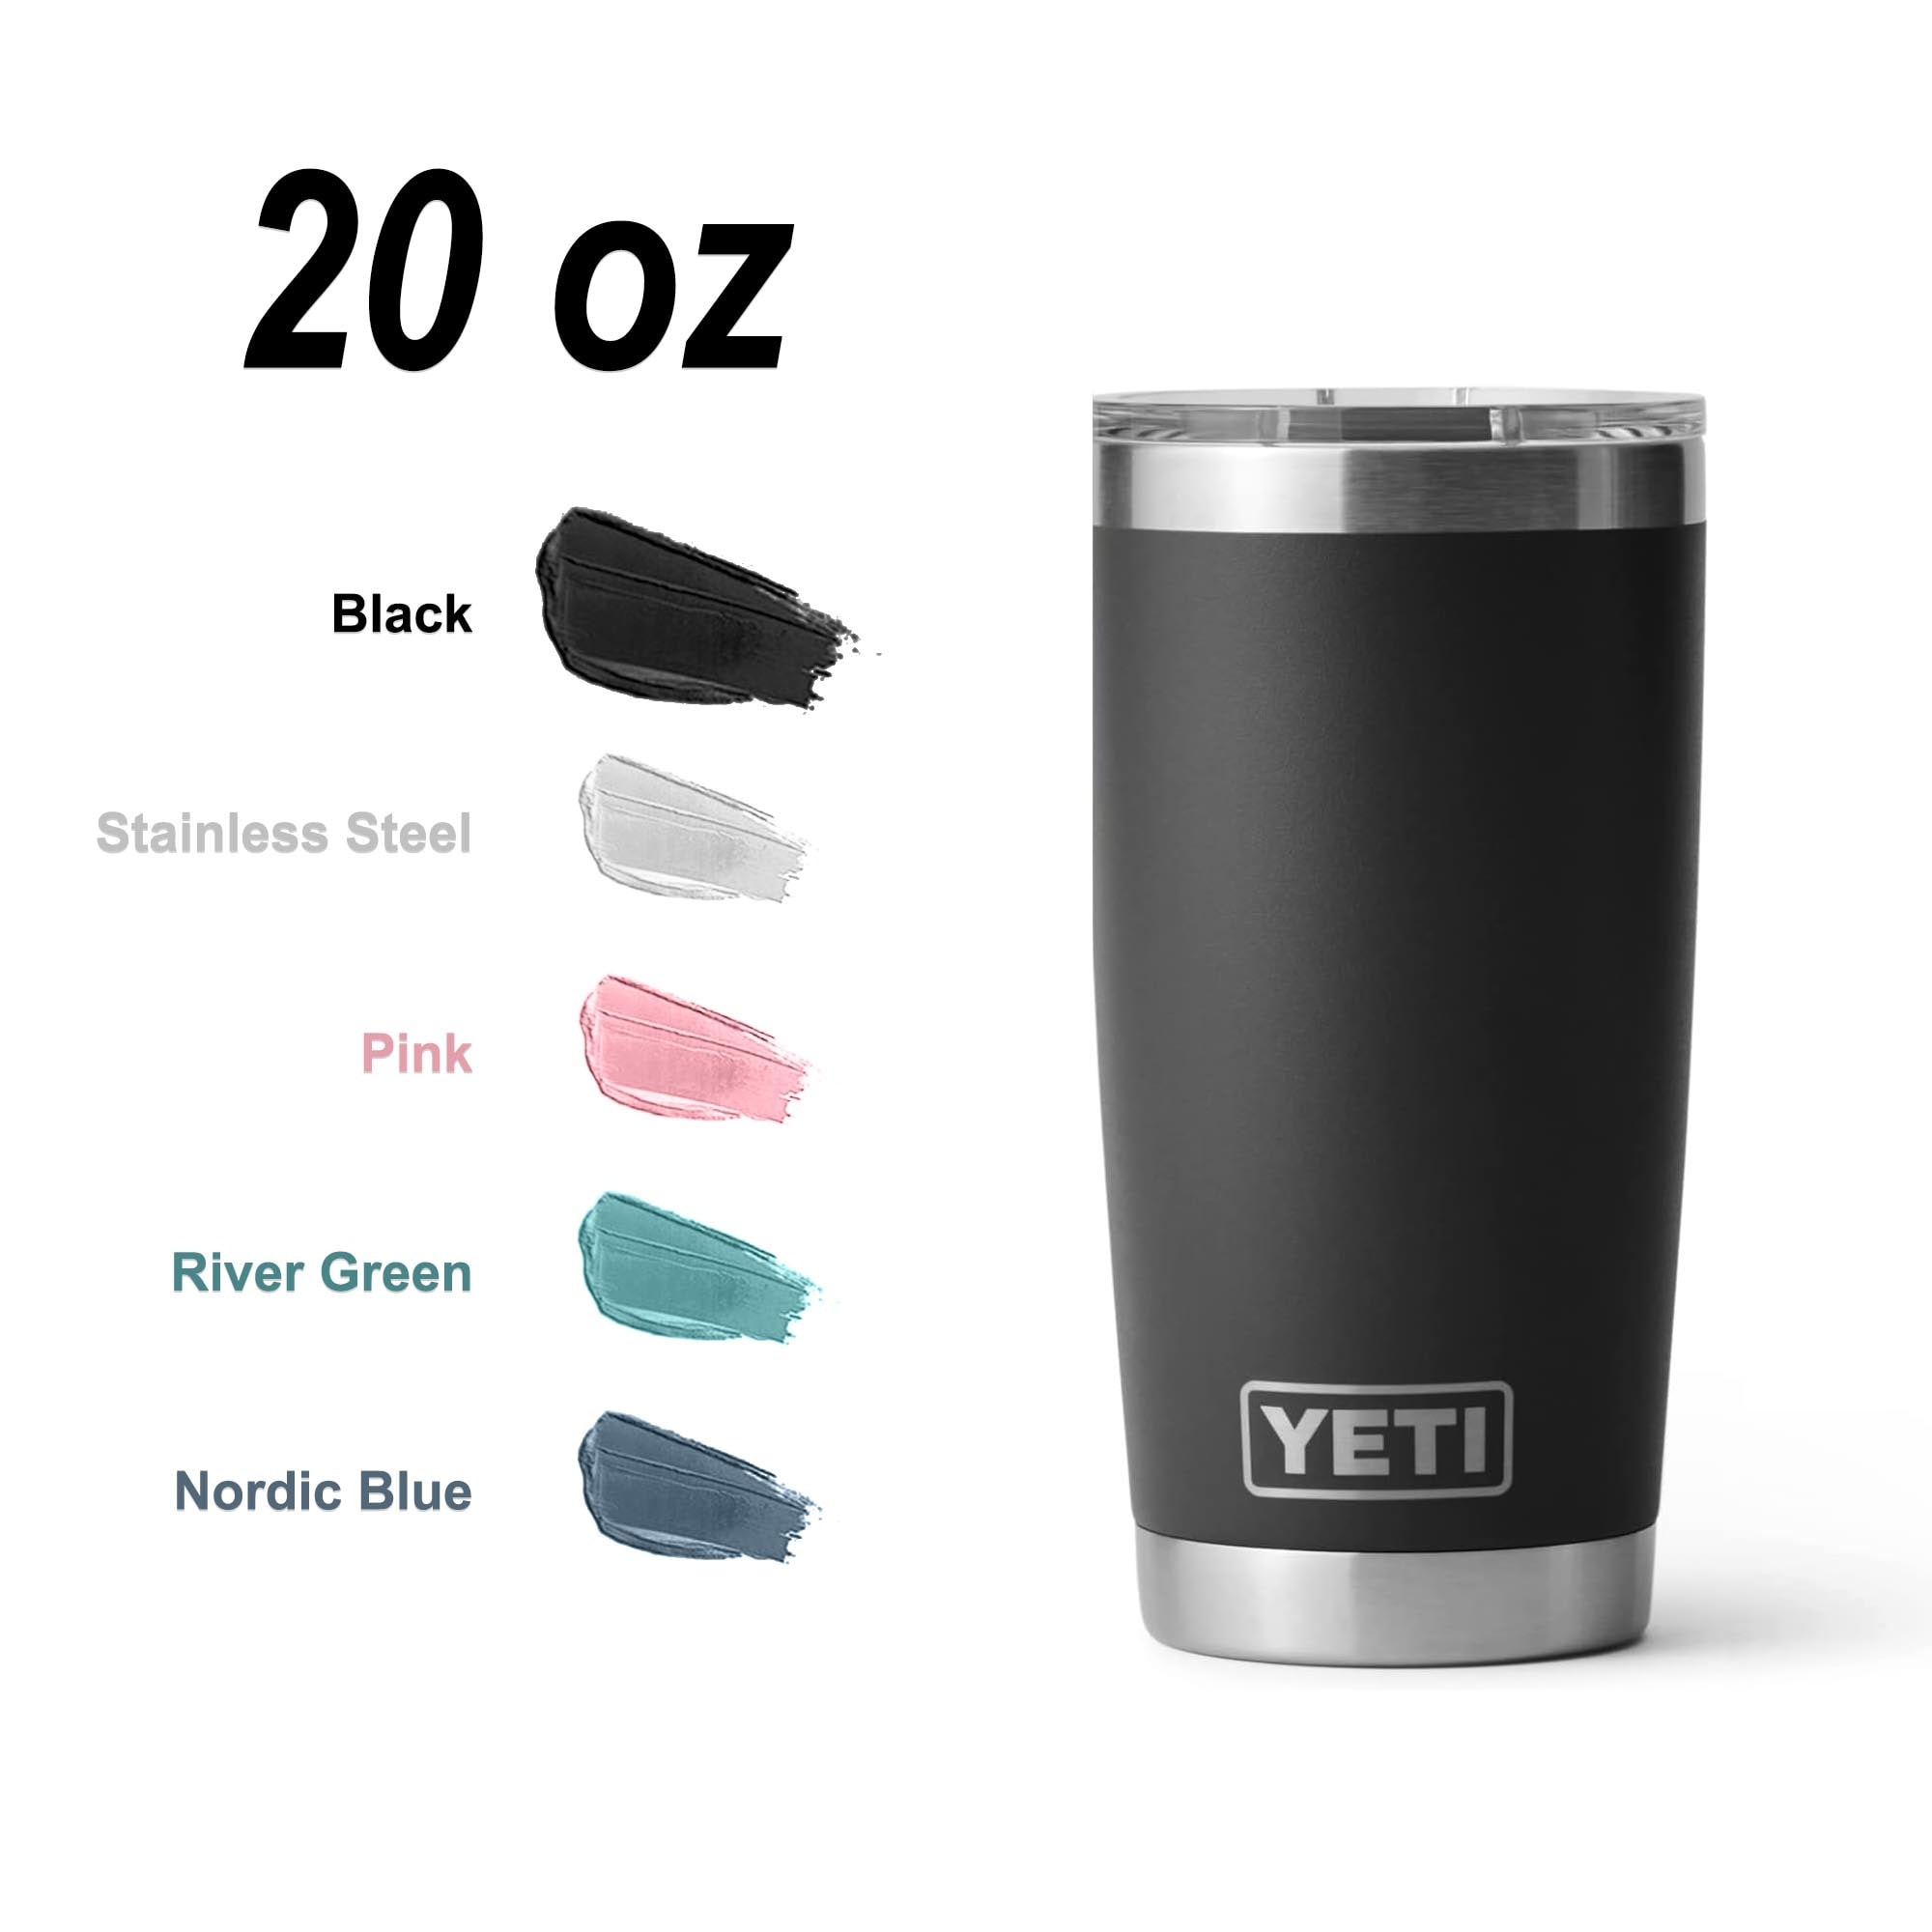 https://ak1.ostkcdn.com/images/products/is/images/direct/a2ab789768f0b46b9de754948ab94081241aec01/YETI-Rambler-20oz-Stainless-Steel-Vacuum-Insulated-Tumbler-w-MagSlider-Lid.jpg